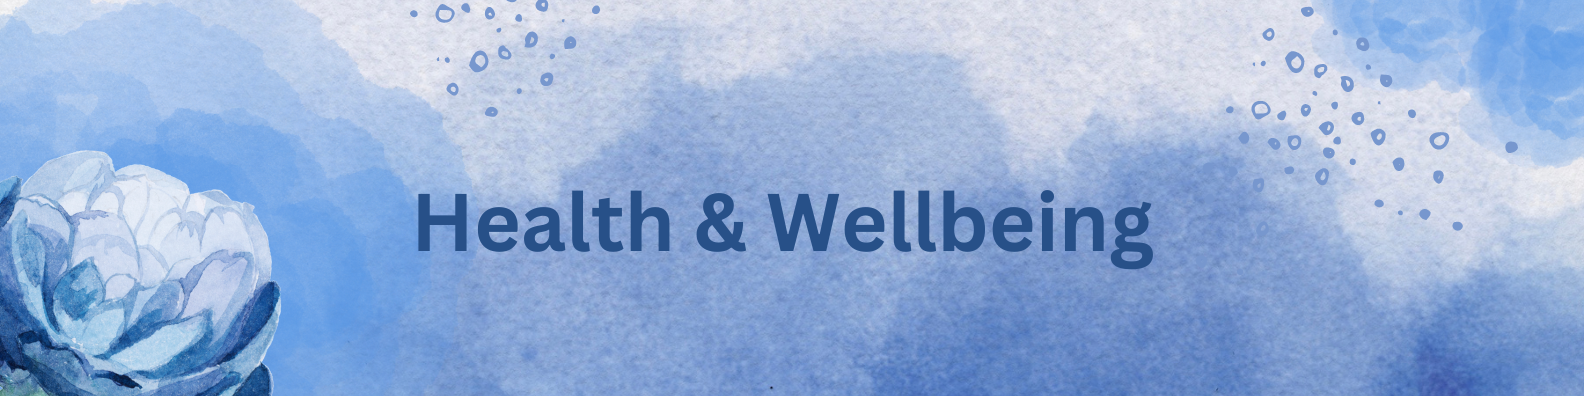 health and wellbeing for employee appreciation 